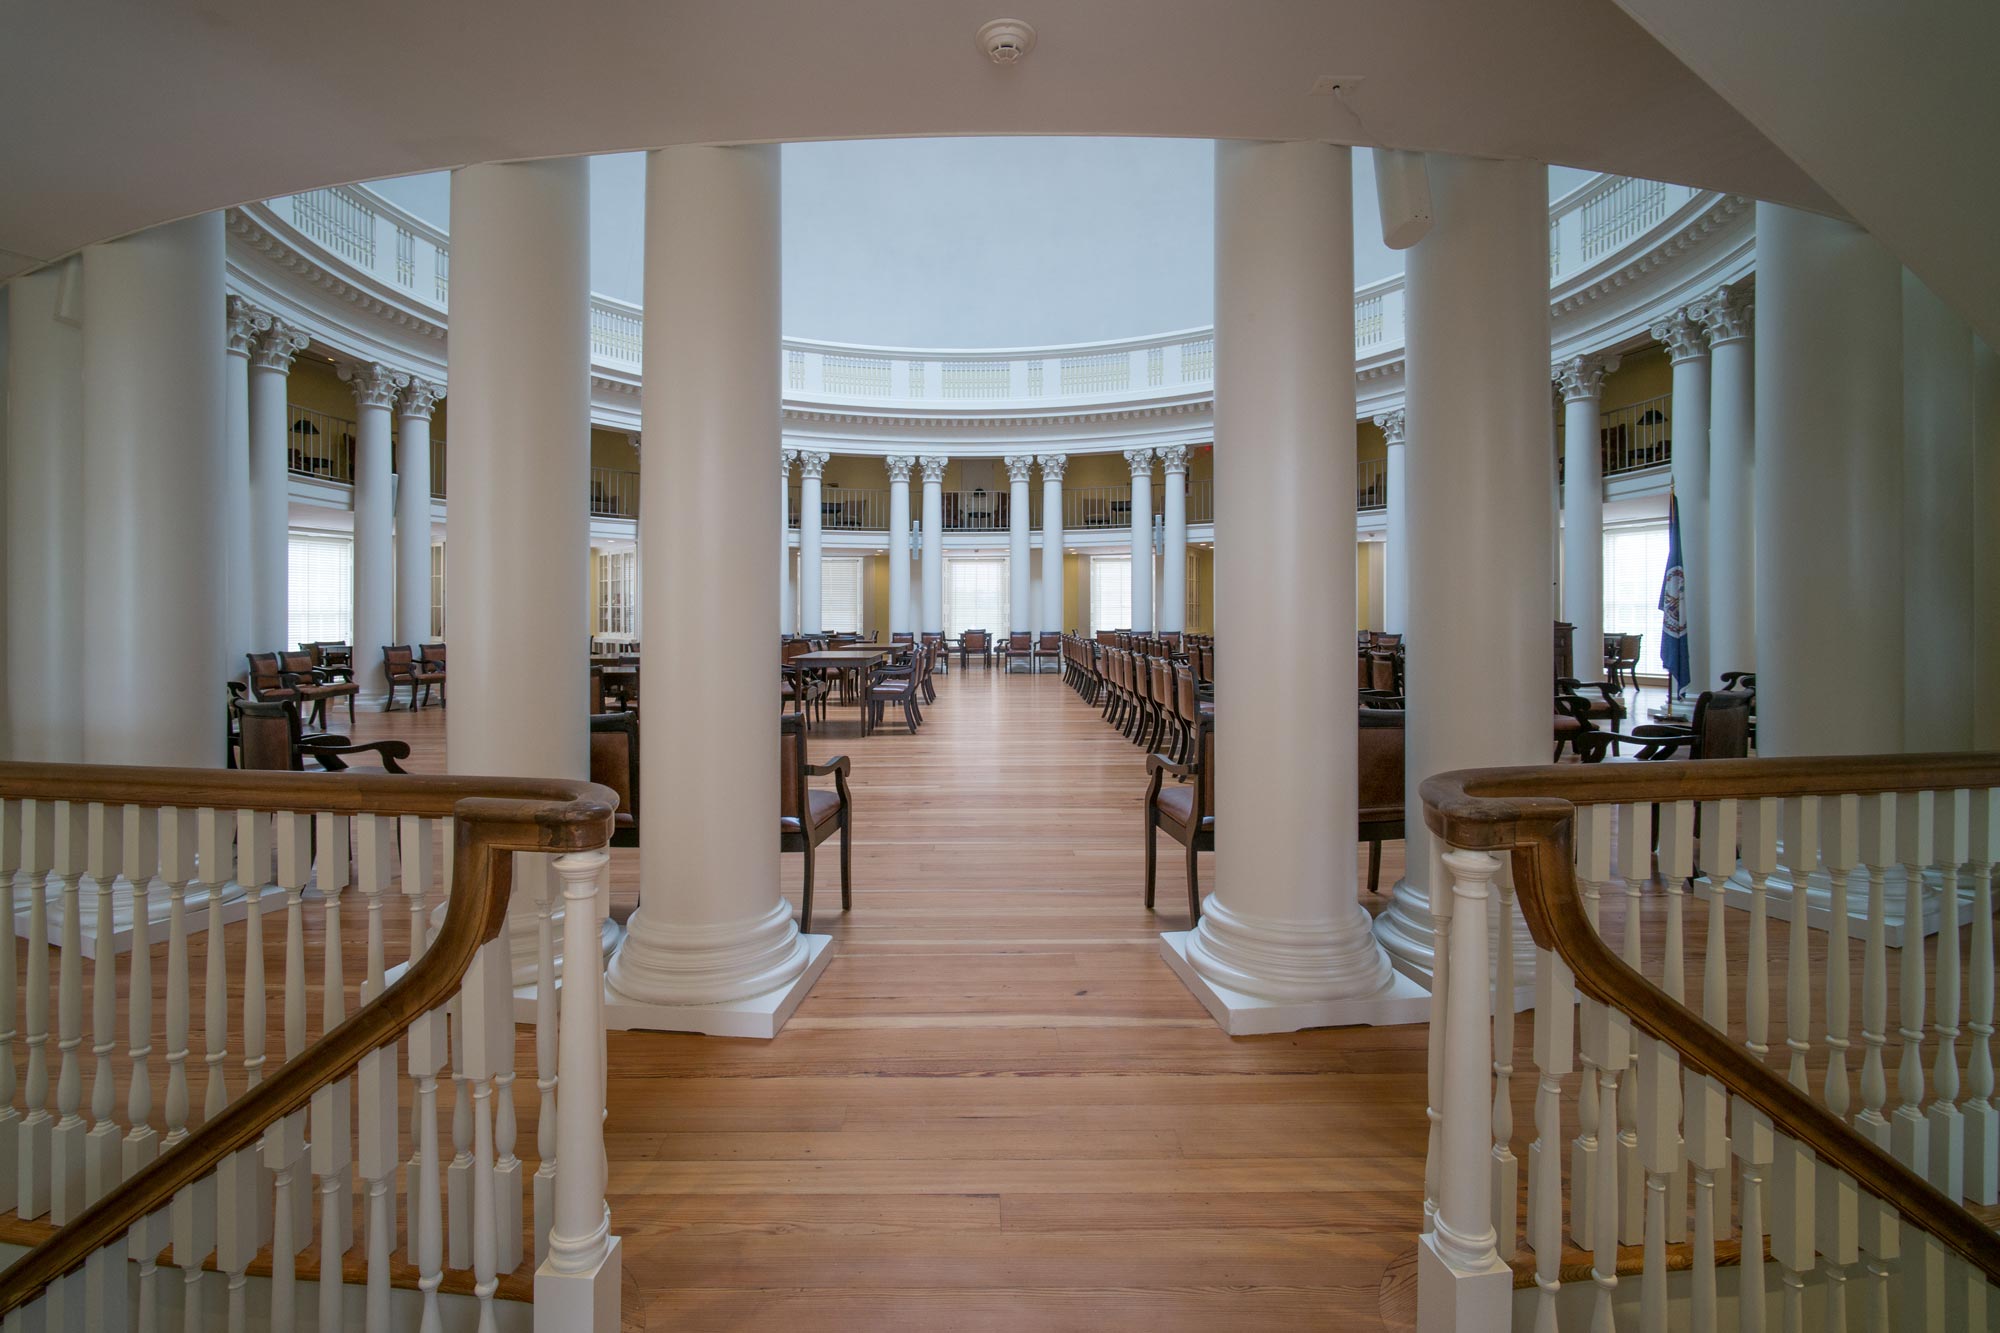 View of the top floor of the Rotunda from the steps where chairs and tables are setup for student to use